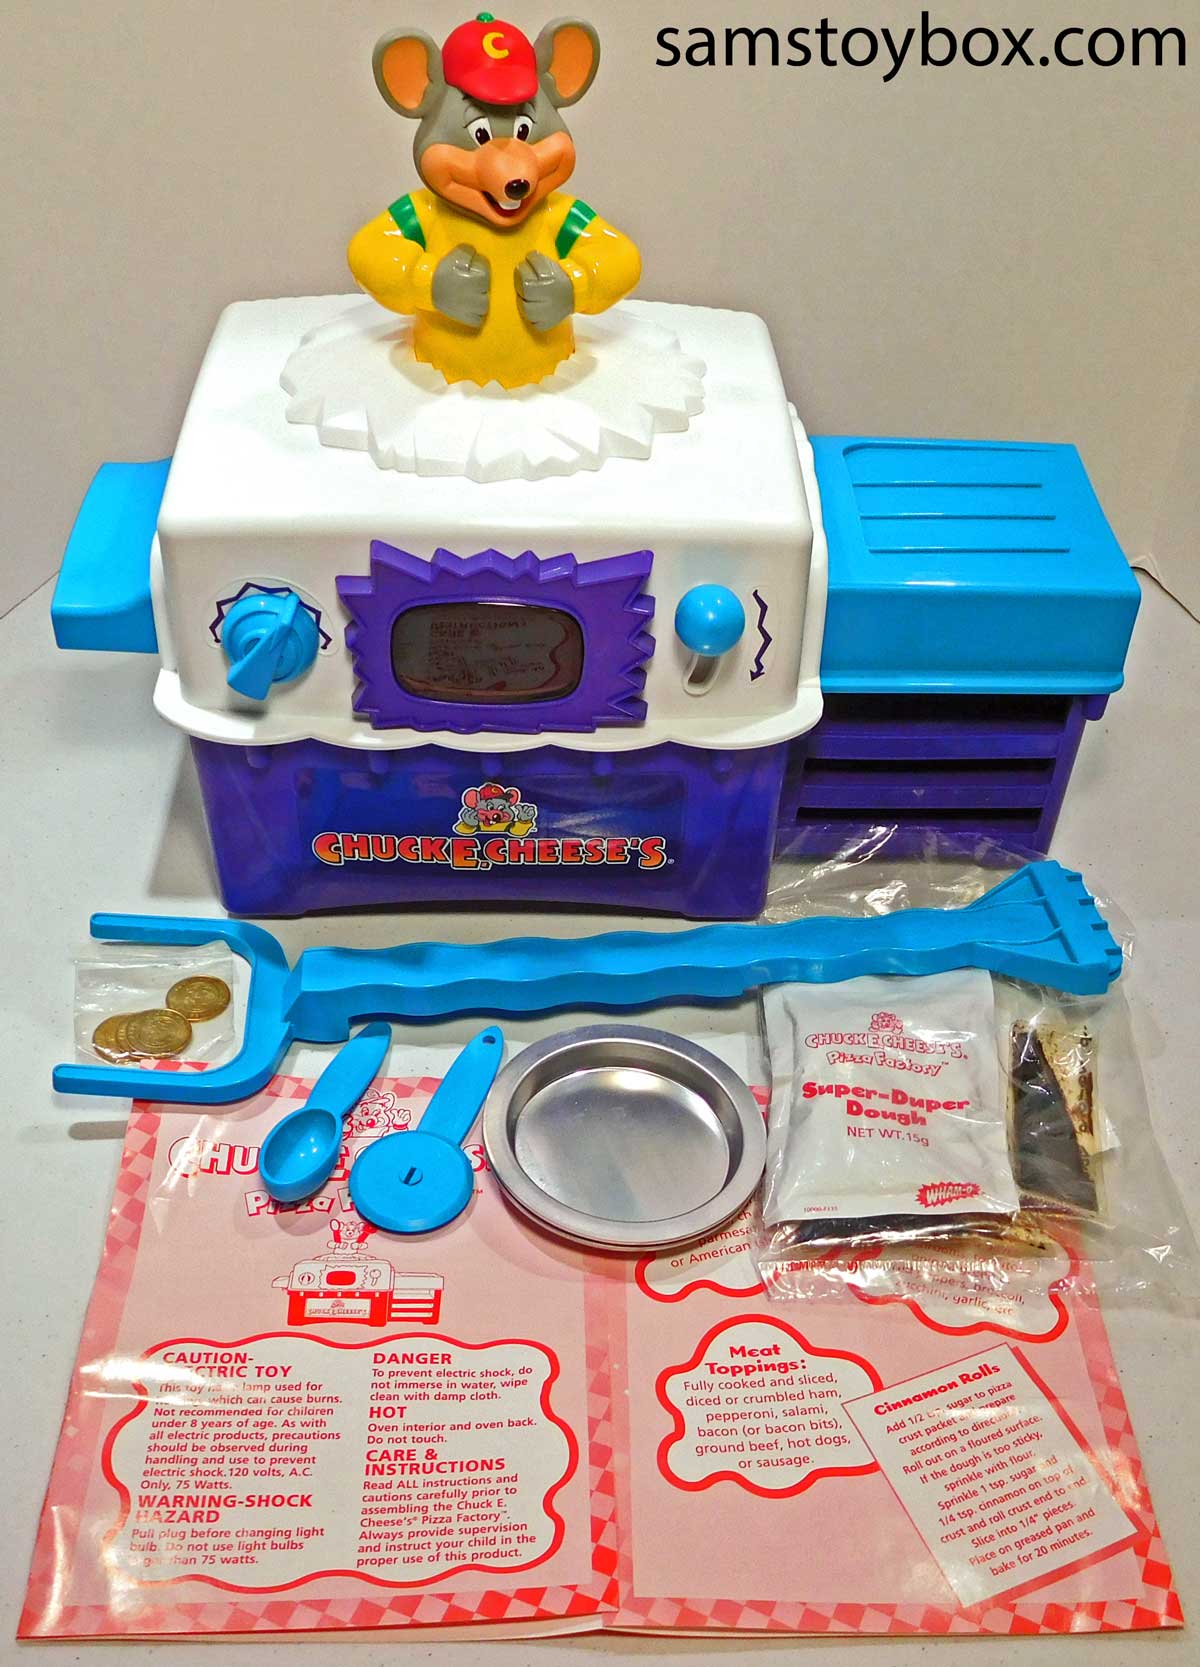 Details about   Chuck E Cheese Pizza Factory Easy Bake Oven Vintage Toy Wham-O Pizza Party VTG 